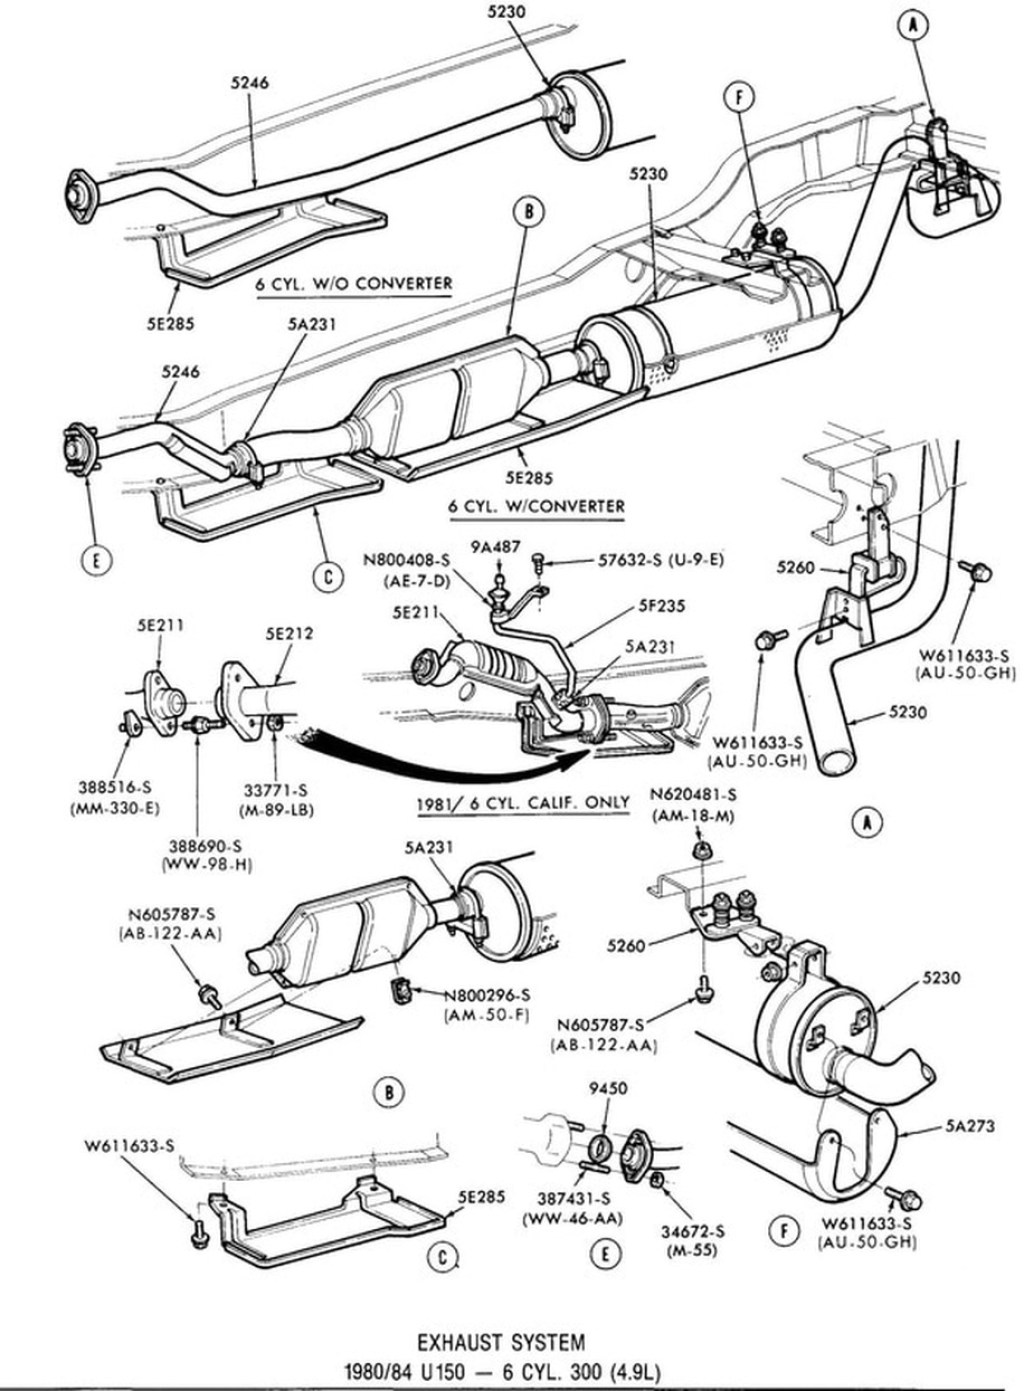 Picture of: Exhaust Systems